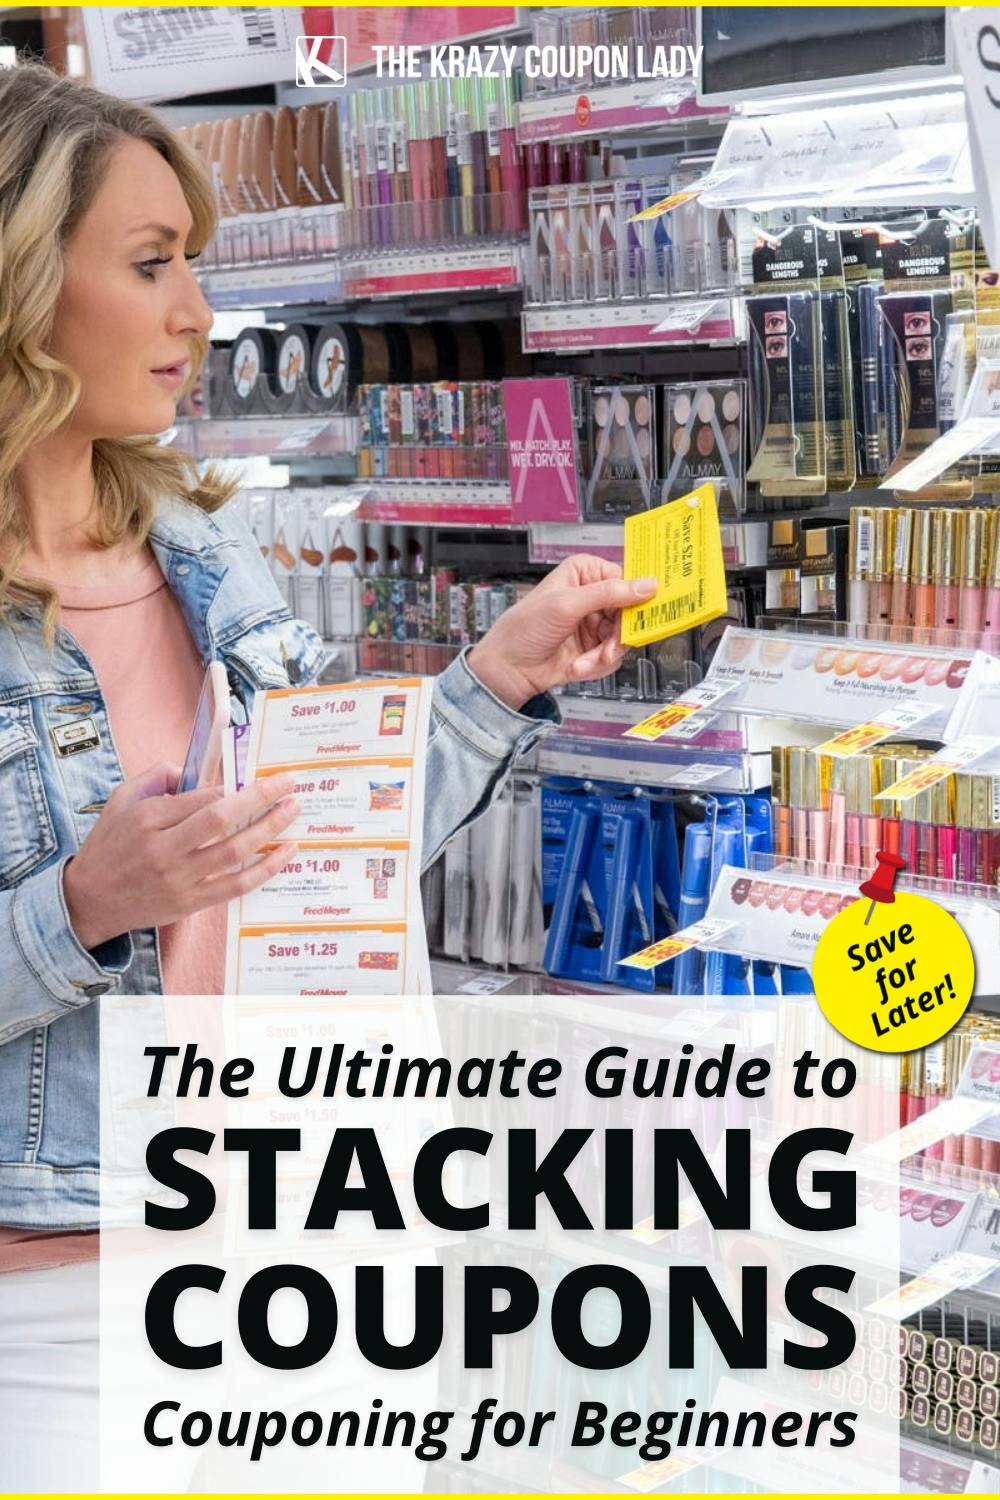 The Ultimate Guide to Stacking Coupons